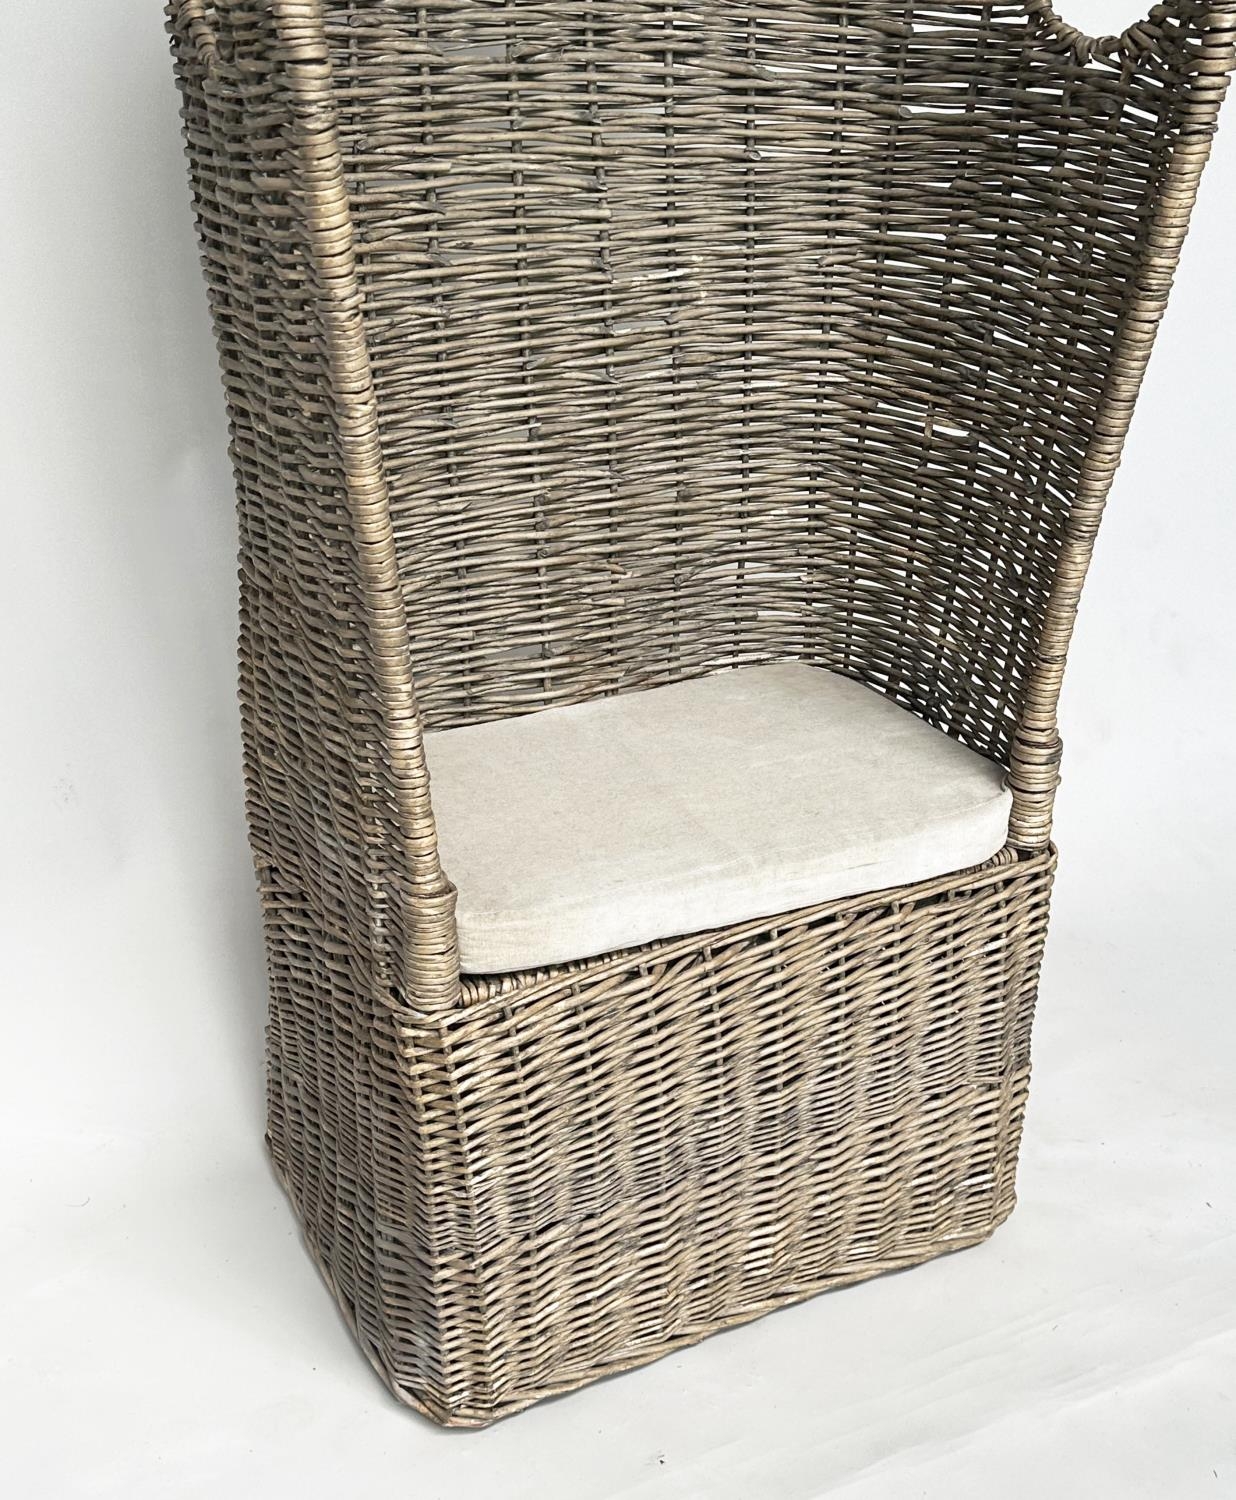 ORANGERY CHAIR, porters style rattan framed and wicker woven panelled with viewing openings, 179cm H - Image 10 of 13